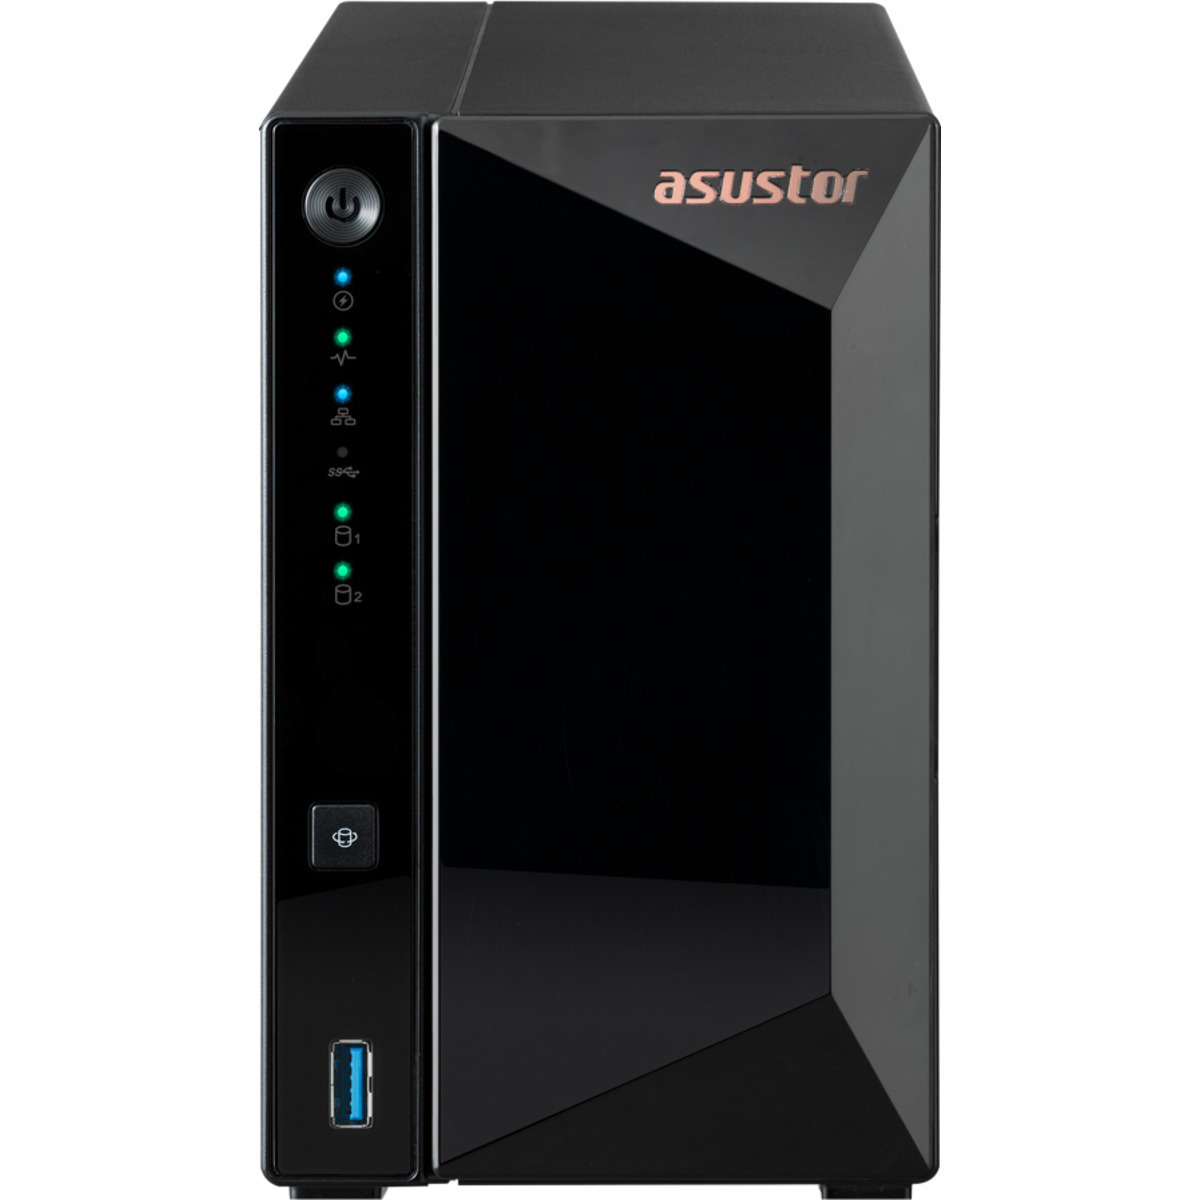 ASUSTOR DRIVESTOR 2 Pro AS3302T 8tb 2-Bay Desktop Personal / Basic Home / Small Office NAS - Network Attached Storage Device 2x4tb Seagate BarraCuda ST4000DM004 3.5 7200rpm SATA 6Gb/s HDD CONSUMER Class Drives Installed - Burn-In Tested DRIVESTOR 2 Pro AS3302T